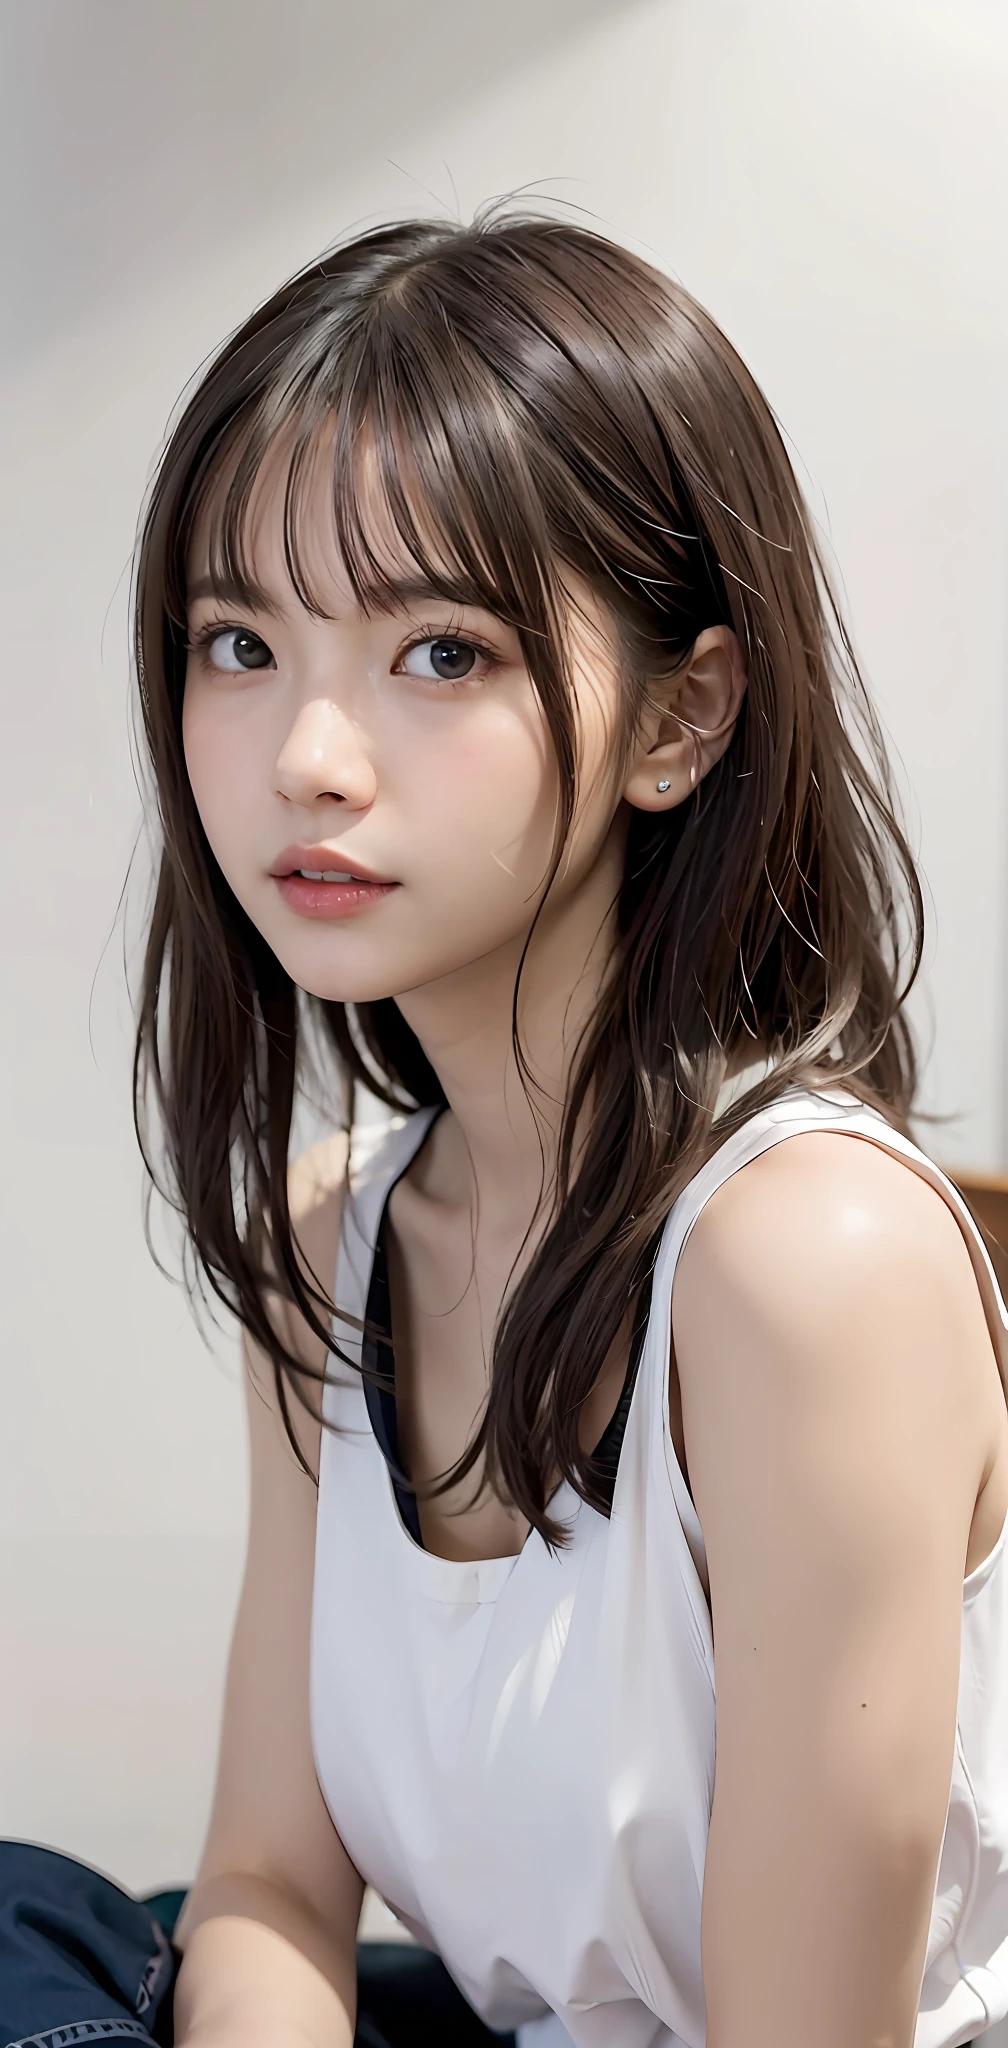 ((​masterpiece、1 beautiful girl、Detailed eye、Shorthair with bangs、neck long、Put your ears out))、big eye、Distinct double eyelids、((beste-Qualit, Super-High Resolution)), (Realisticity: 1.4), OriginalPhotographs, 1girl in,cinematlic lighting、japanes、Asian Beauty、Korea person、Super beauty、Beautiful skin、very Bigger breasts、A slender、The body is facing forward、(A hyper-realistic)、(hight resolution)、(8K)、(highly detaile)、(Best Illustration)、(beautifully detailed eyes)、(ultra-detailliert)、detailed face with、looki at viewer、Facing straight ahead、neat and clean clothes、Sleeveless、short-hair、A dark-haired、46-point diagonal bangs、Background is really nothing but pure white background、neat atmosphere、